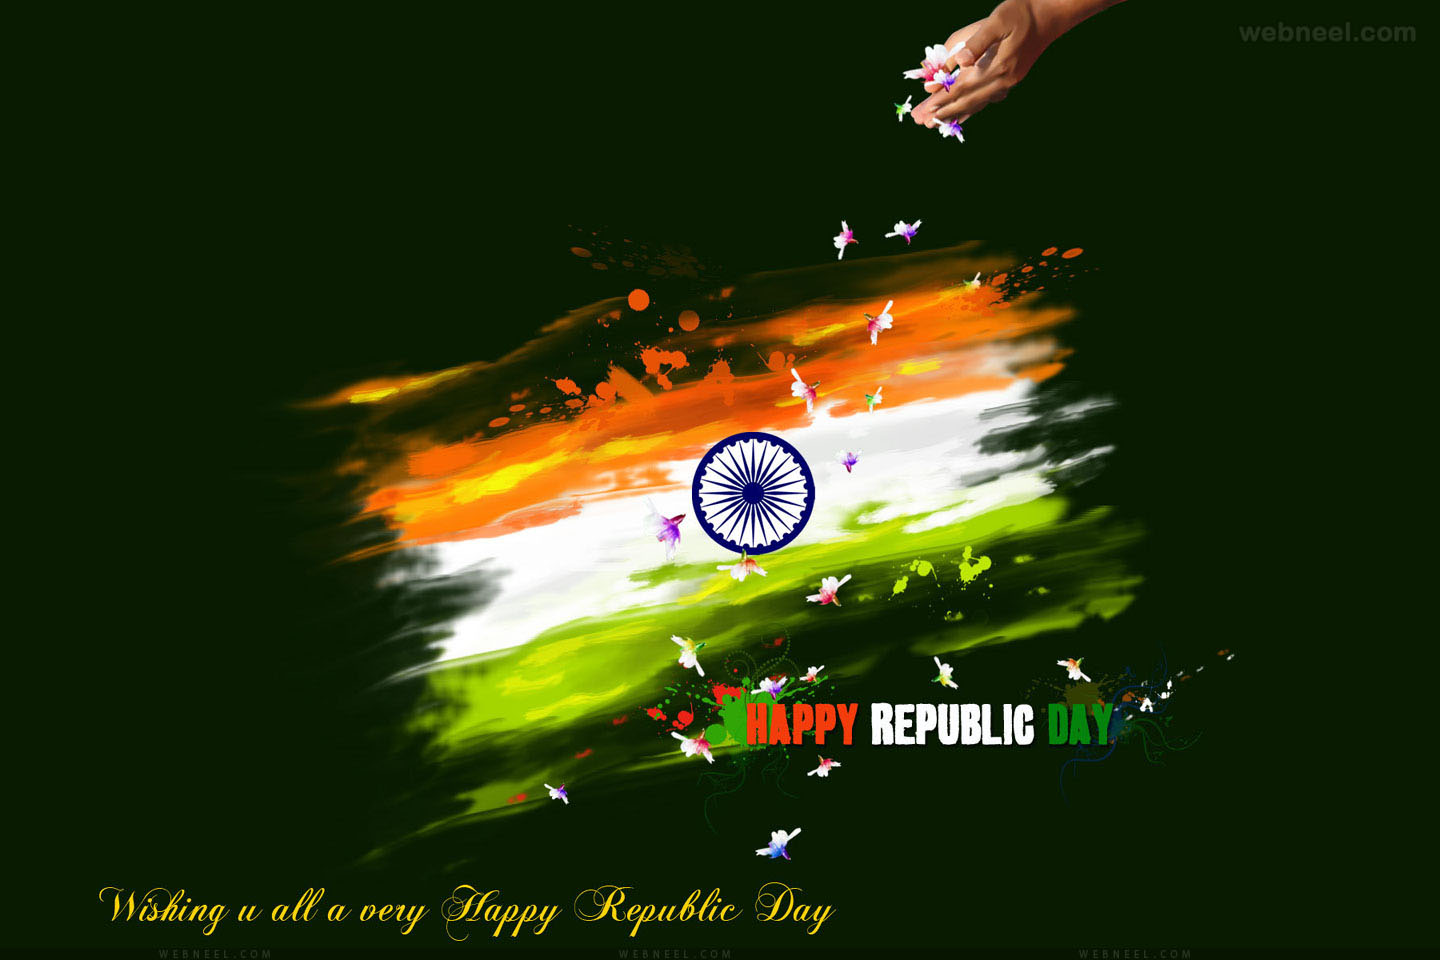 25 Beautiful Happy Republic Day Wishes And Wallpapers 600 x 450 jpeg 59 kb. happy republic day wishes and wallpapers